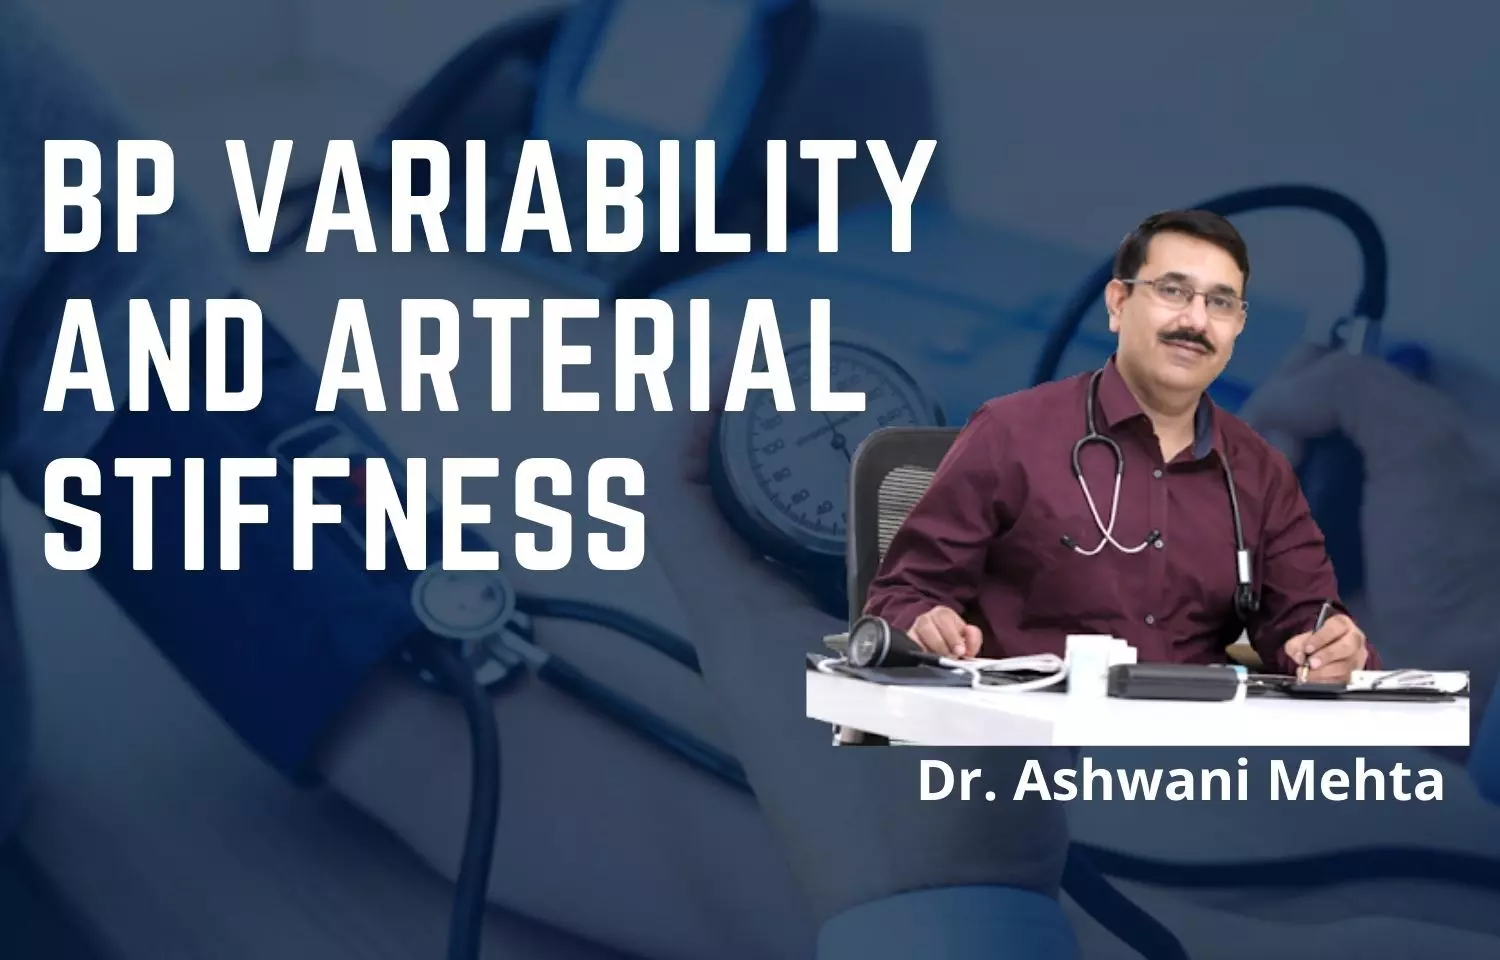 BP Variability, Arterial stiffness and Cilnidipine - A focus review